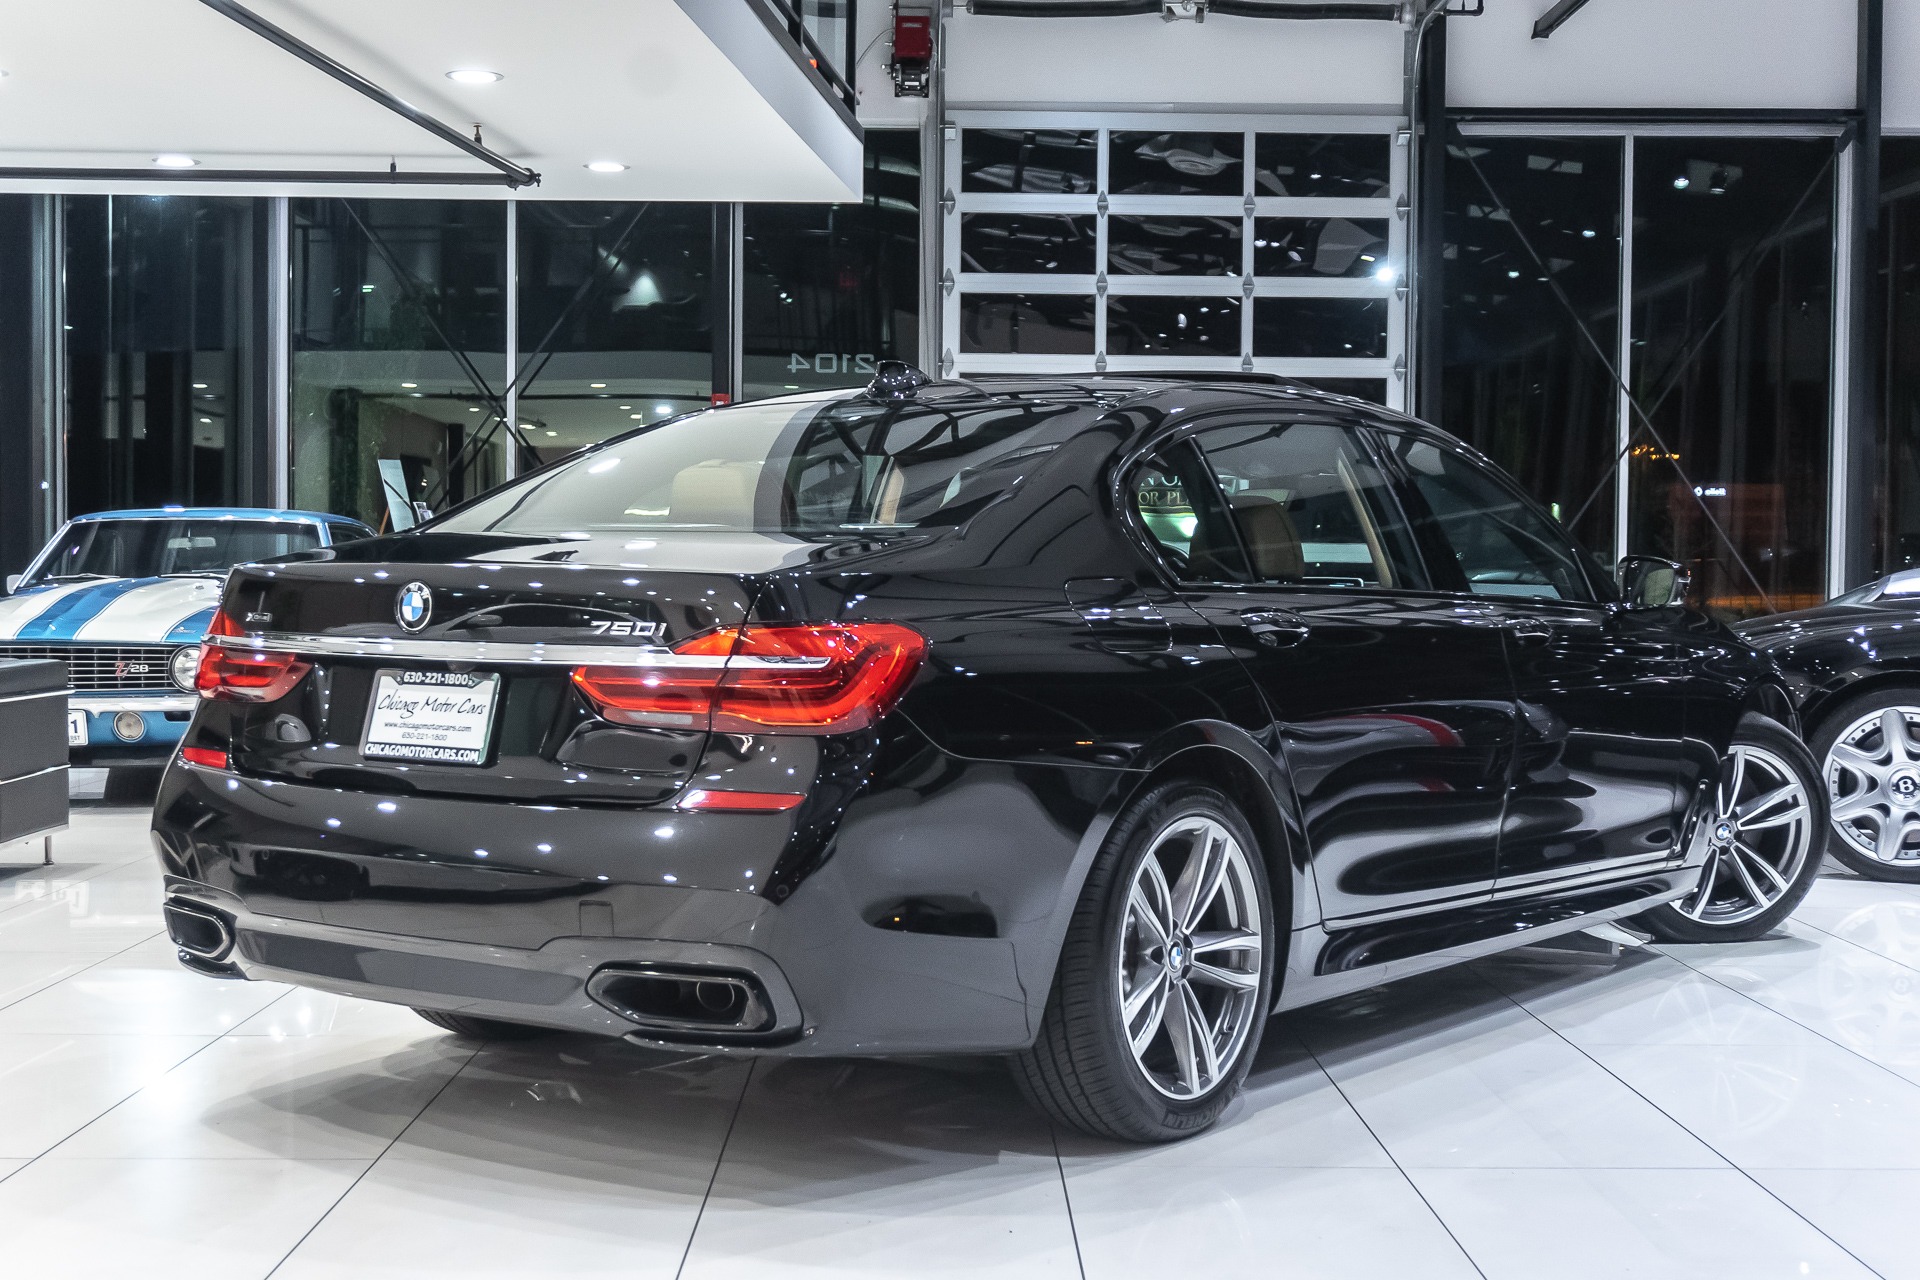 Used 2018 BMW 750i xDrive M-Sport + Autobahn Pkg MSRP $130k+ For Sale  (Special Pricing) | Chicago Motor Cars Stock #16177